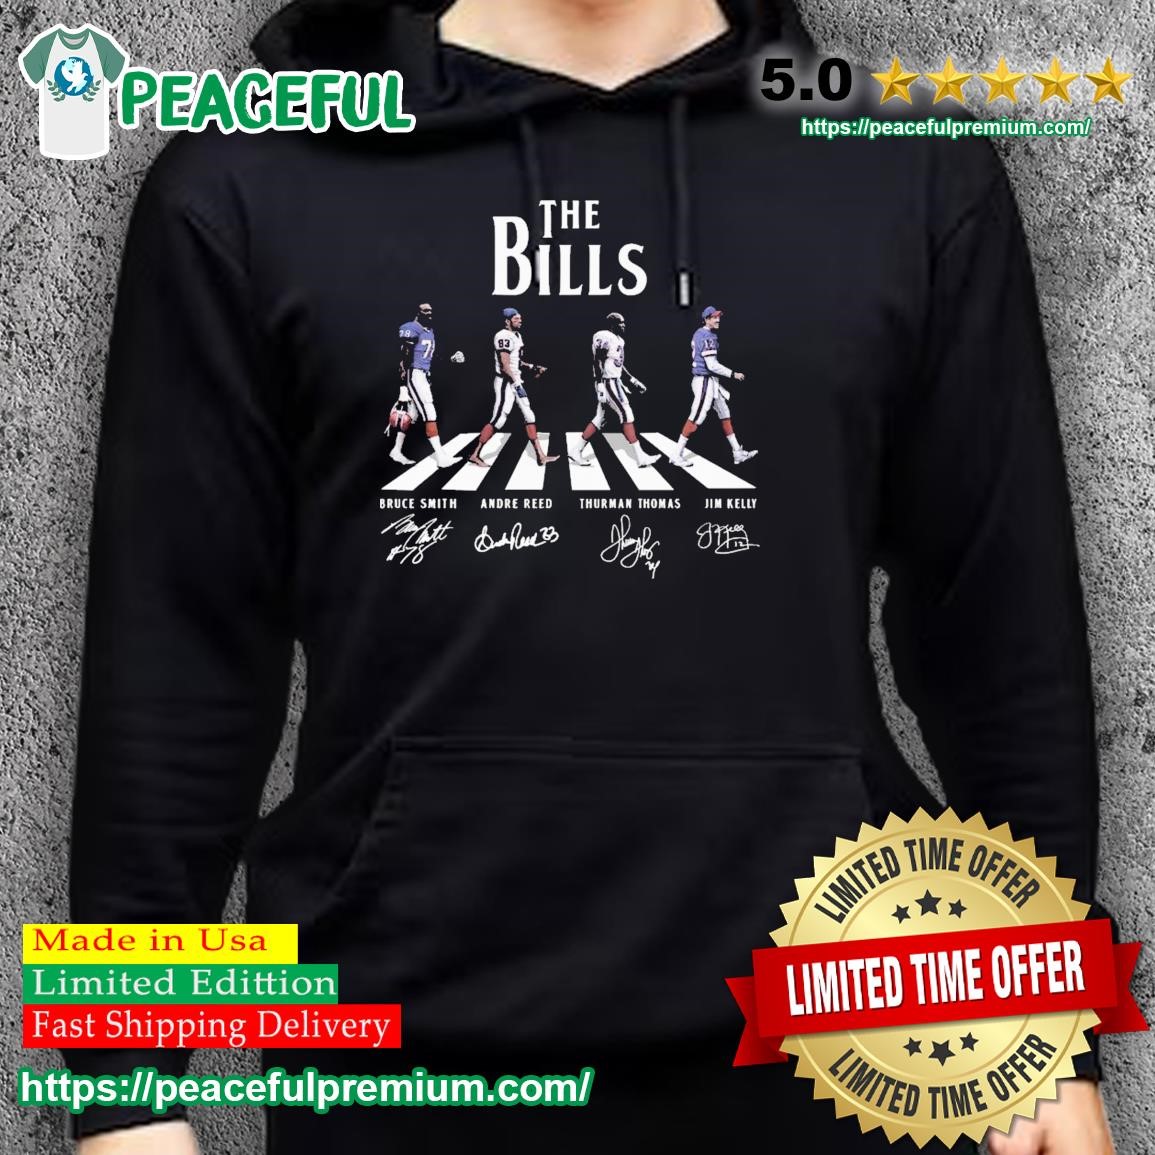 New York Yankees And Buffalo Bills Abbey Road Signatures Yankees T-shirt  2022 – The Database Site Store